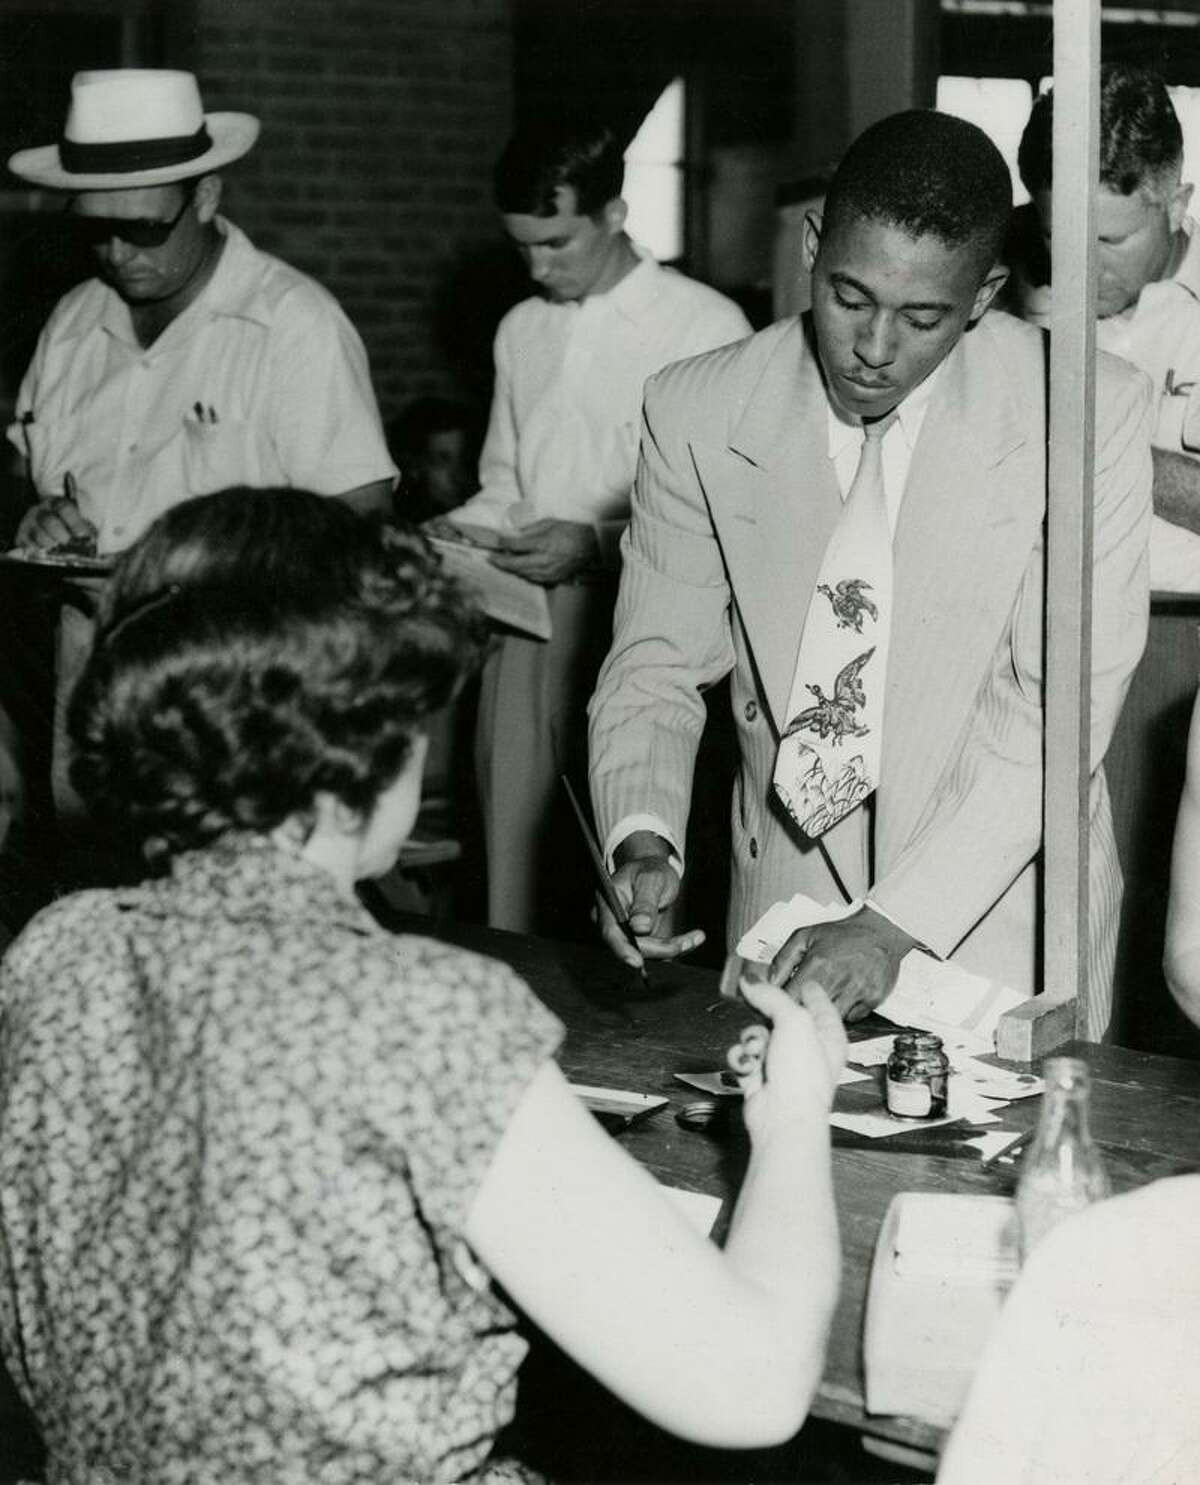 John S. Chase is shown enrolling at the University of Texas in 1950, just two days after the Sweatt v. Painter U.S. Supreme Court ruling opened white schools to Black students.